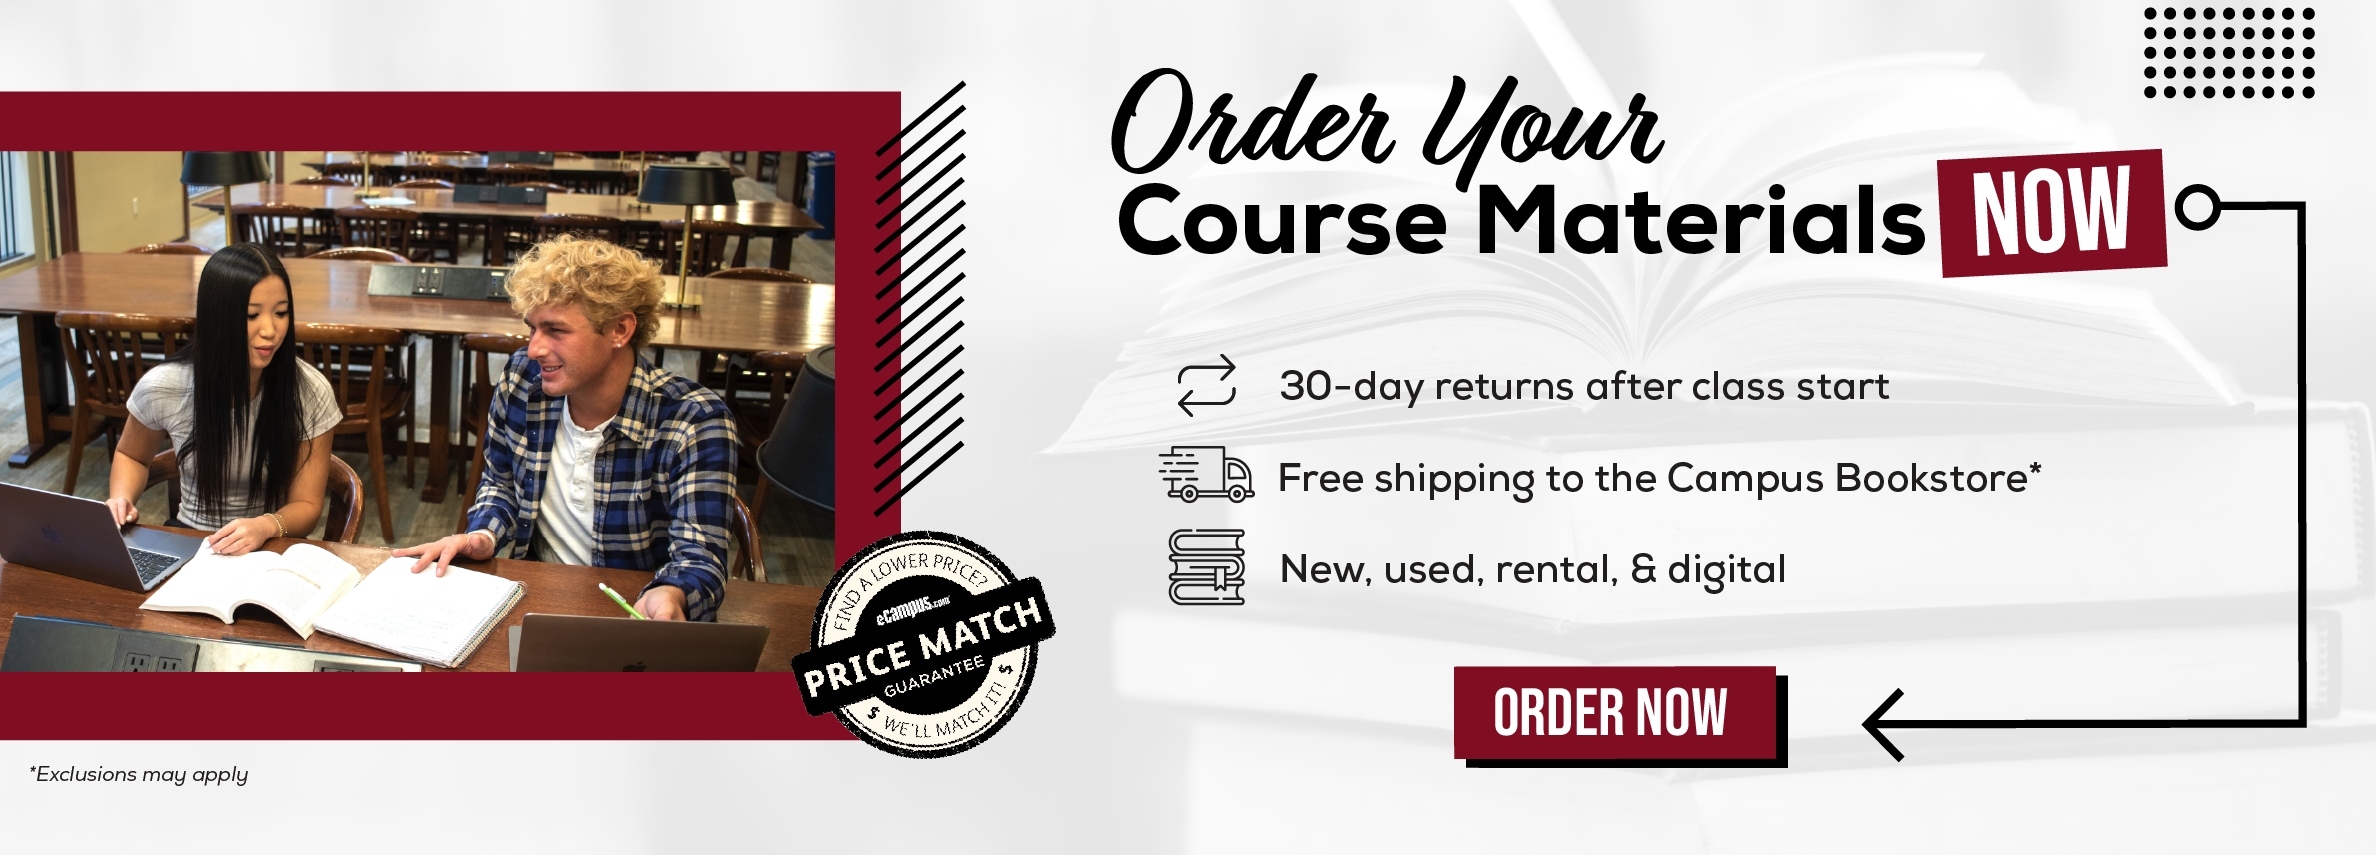 Order Your Course Materials Now. 30-day returns after class start. Free shipping to the Campus Bookstore* New, used, rental, & digital. Order now. *Exclusions may apply. (new tab)